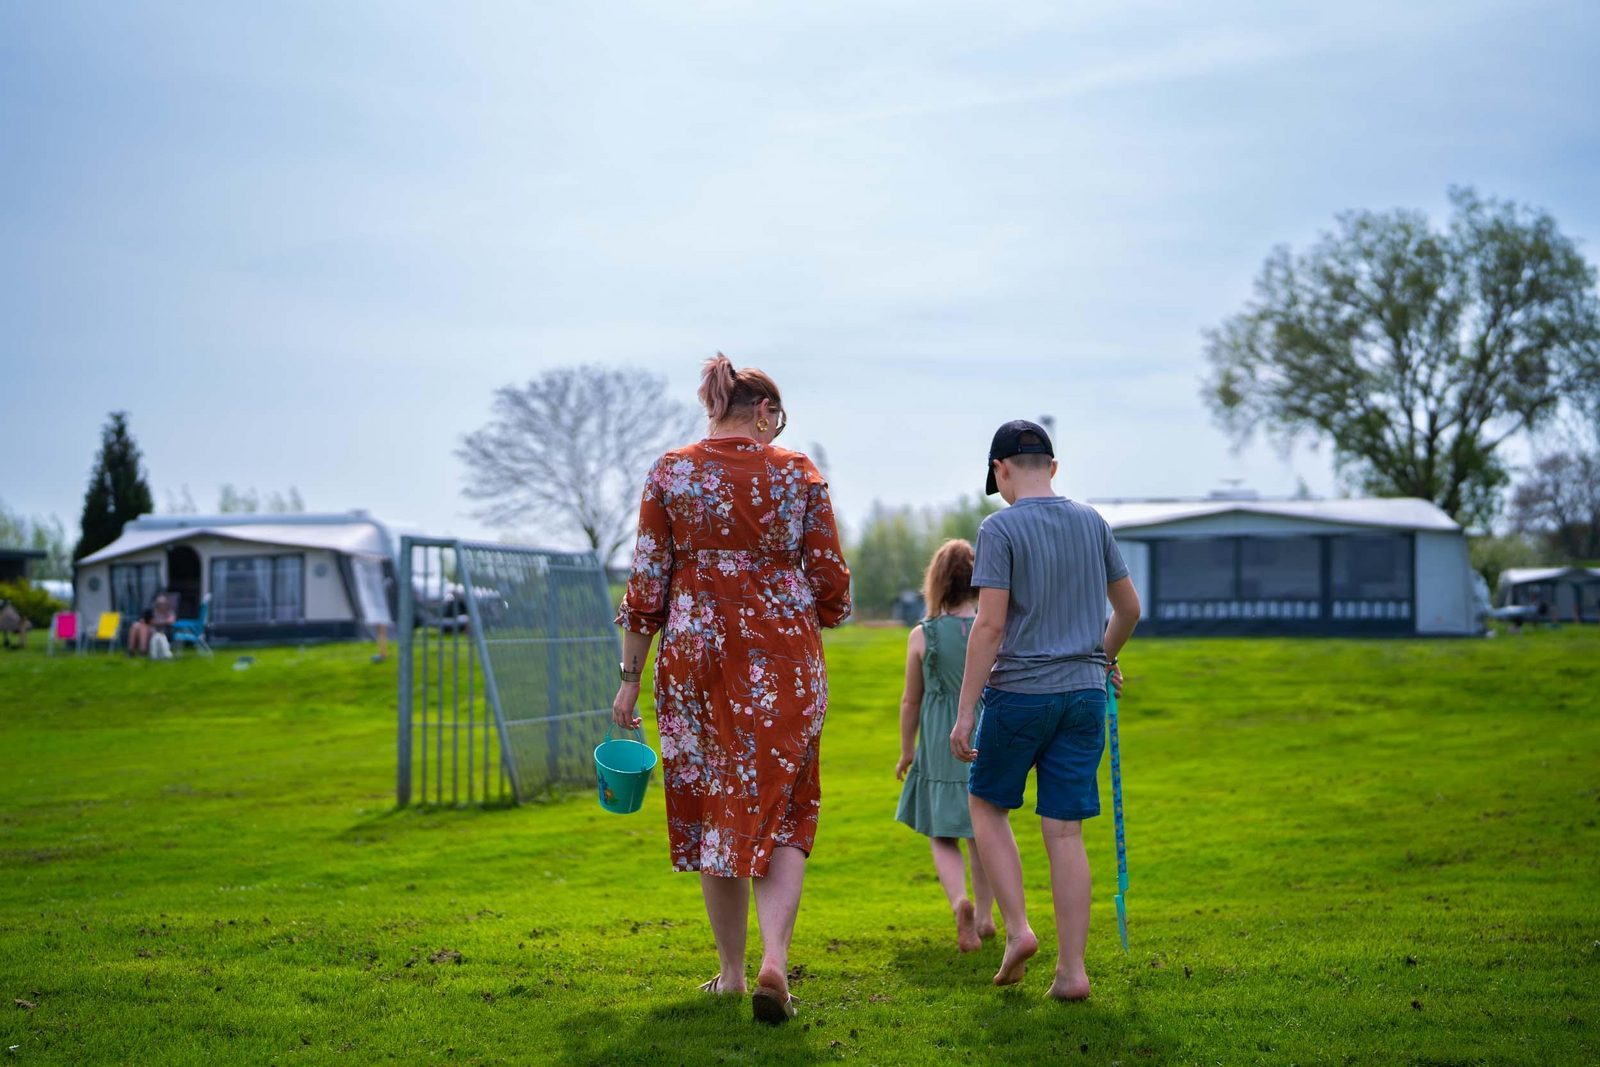 Camping pitches at Resort Lexmond